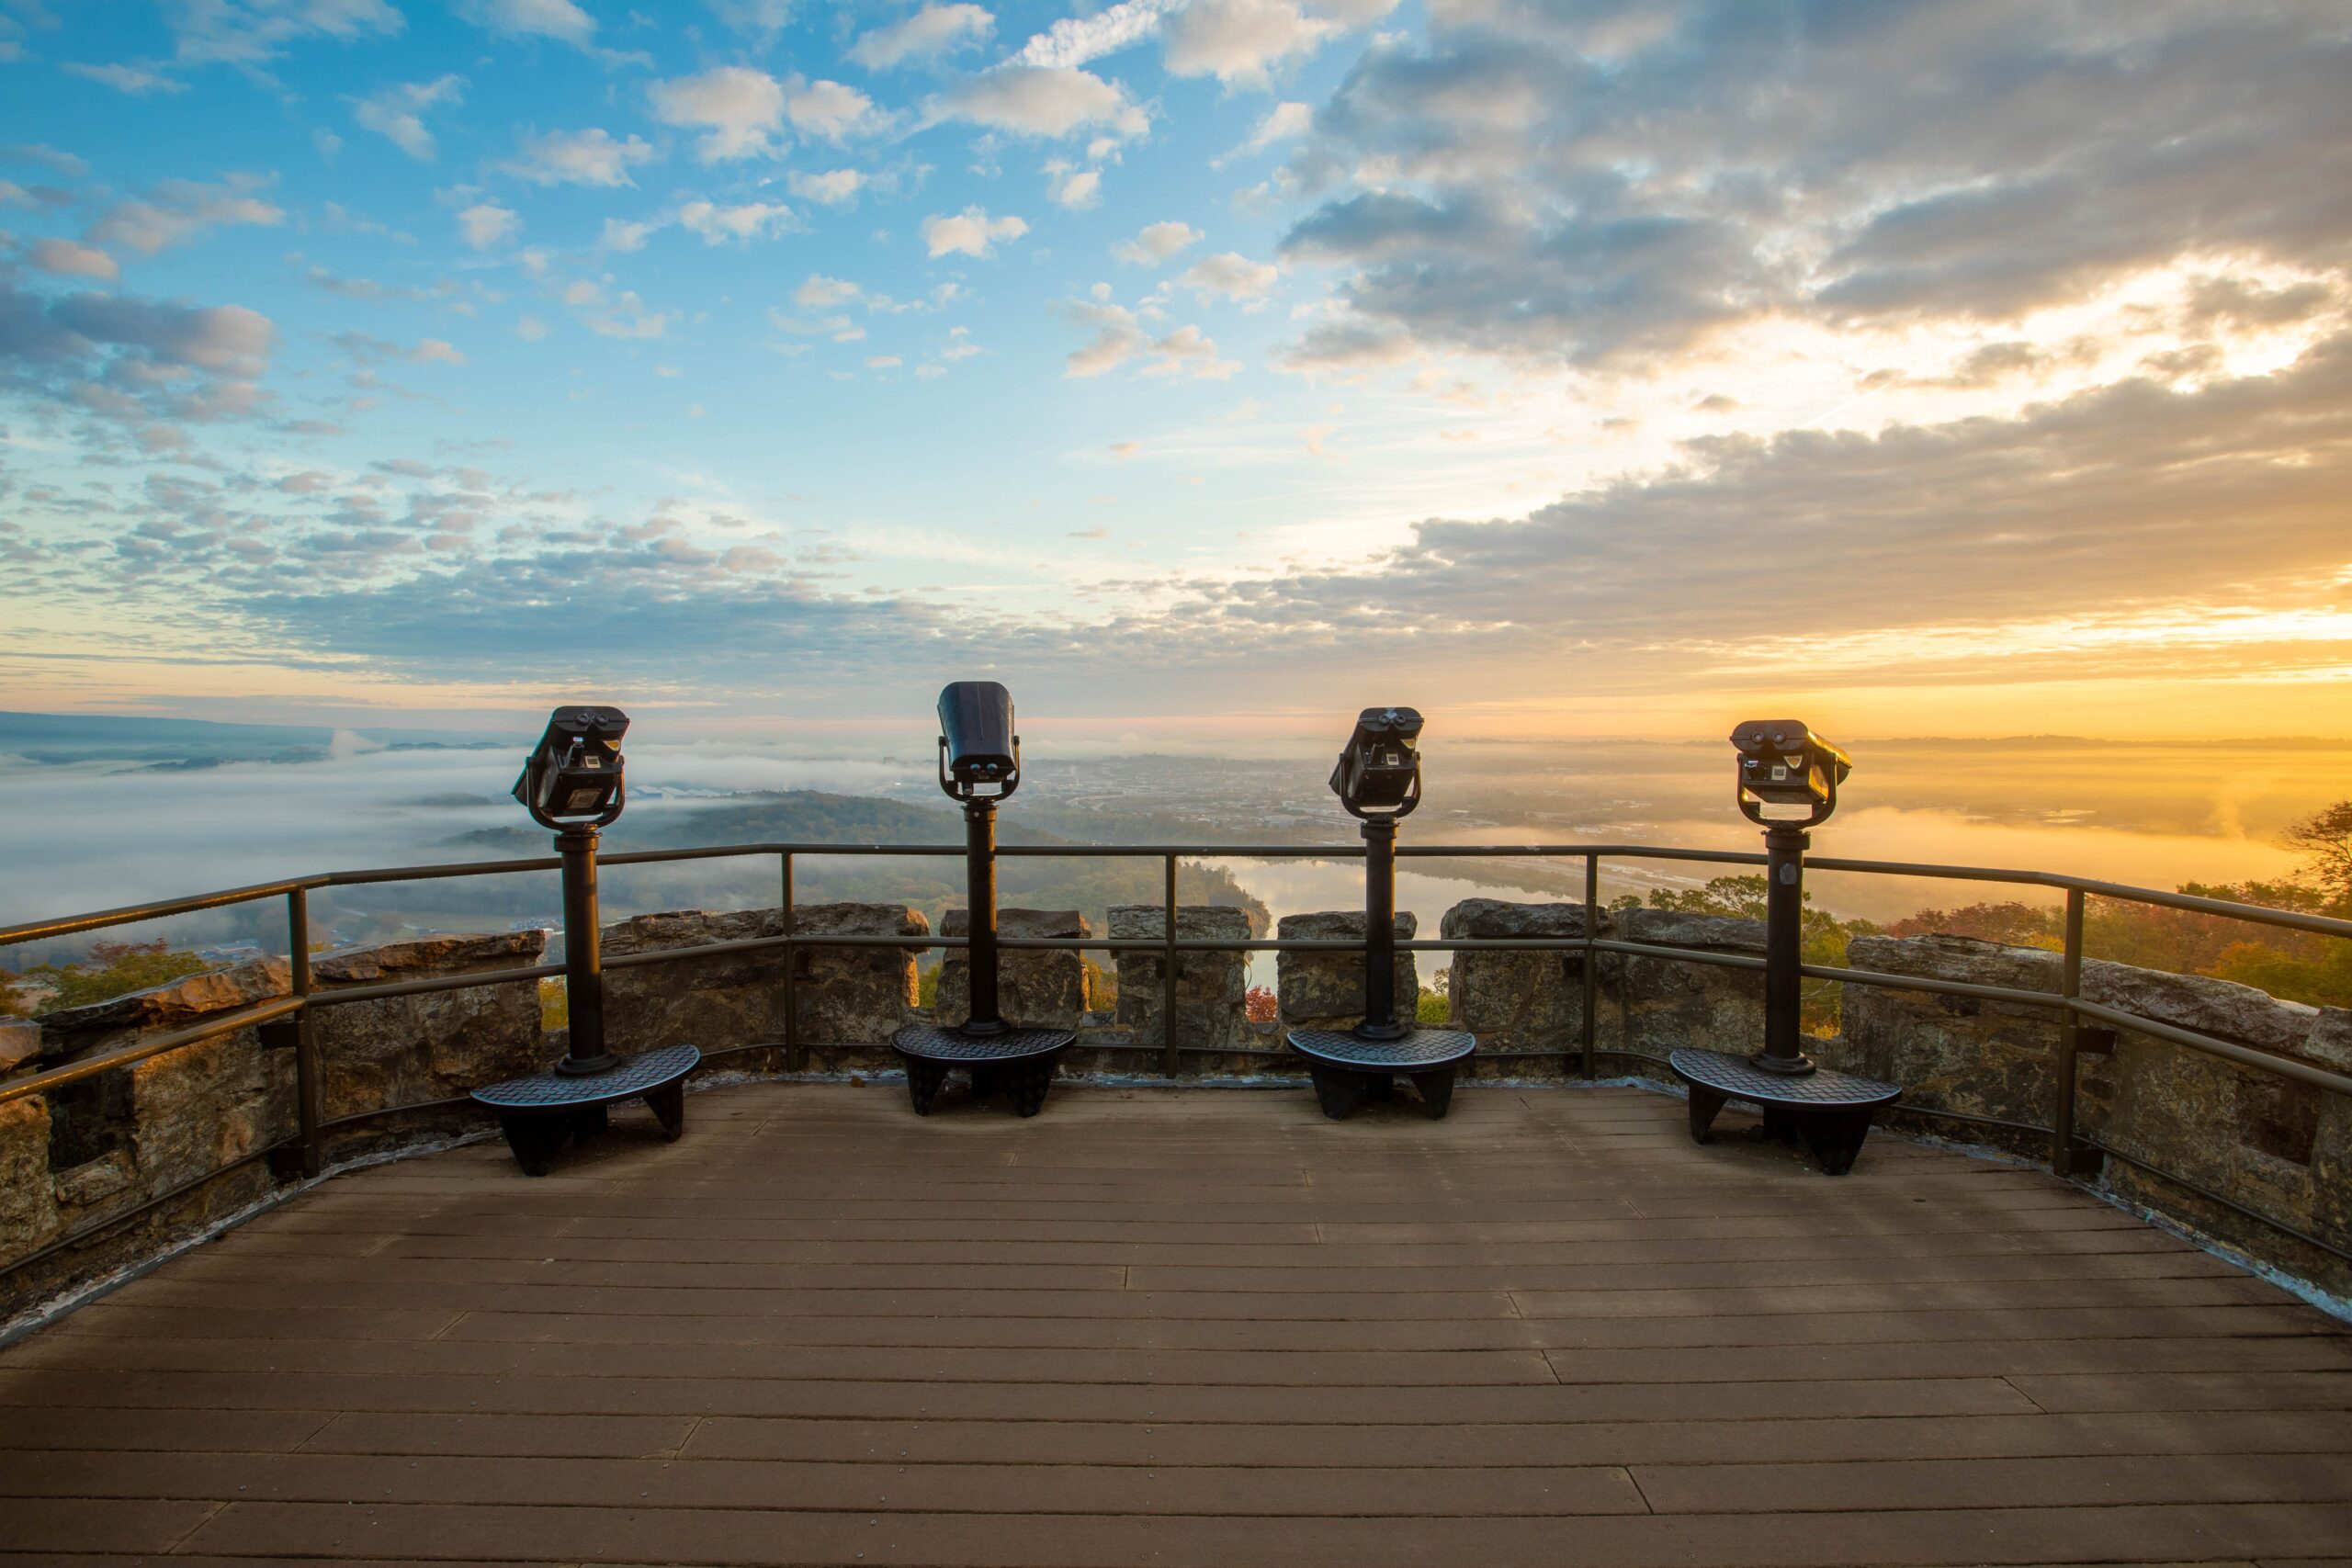 Four lookout stations viewing a misty scenic Chattanooga